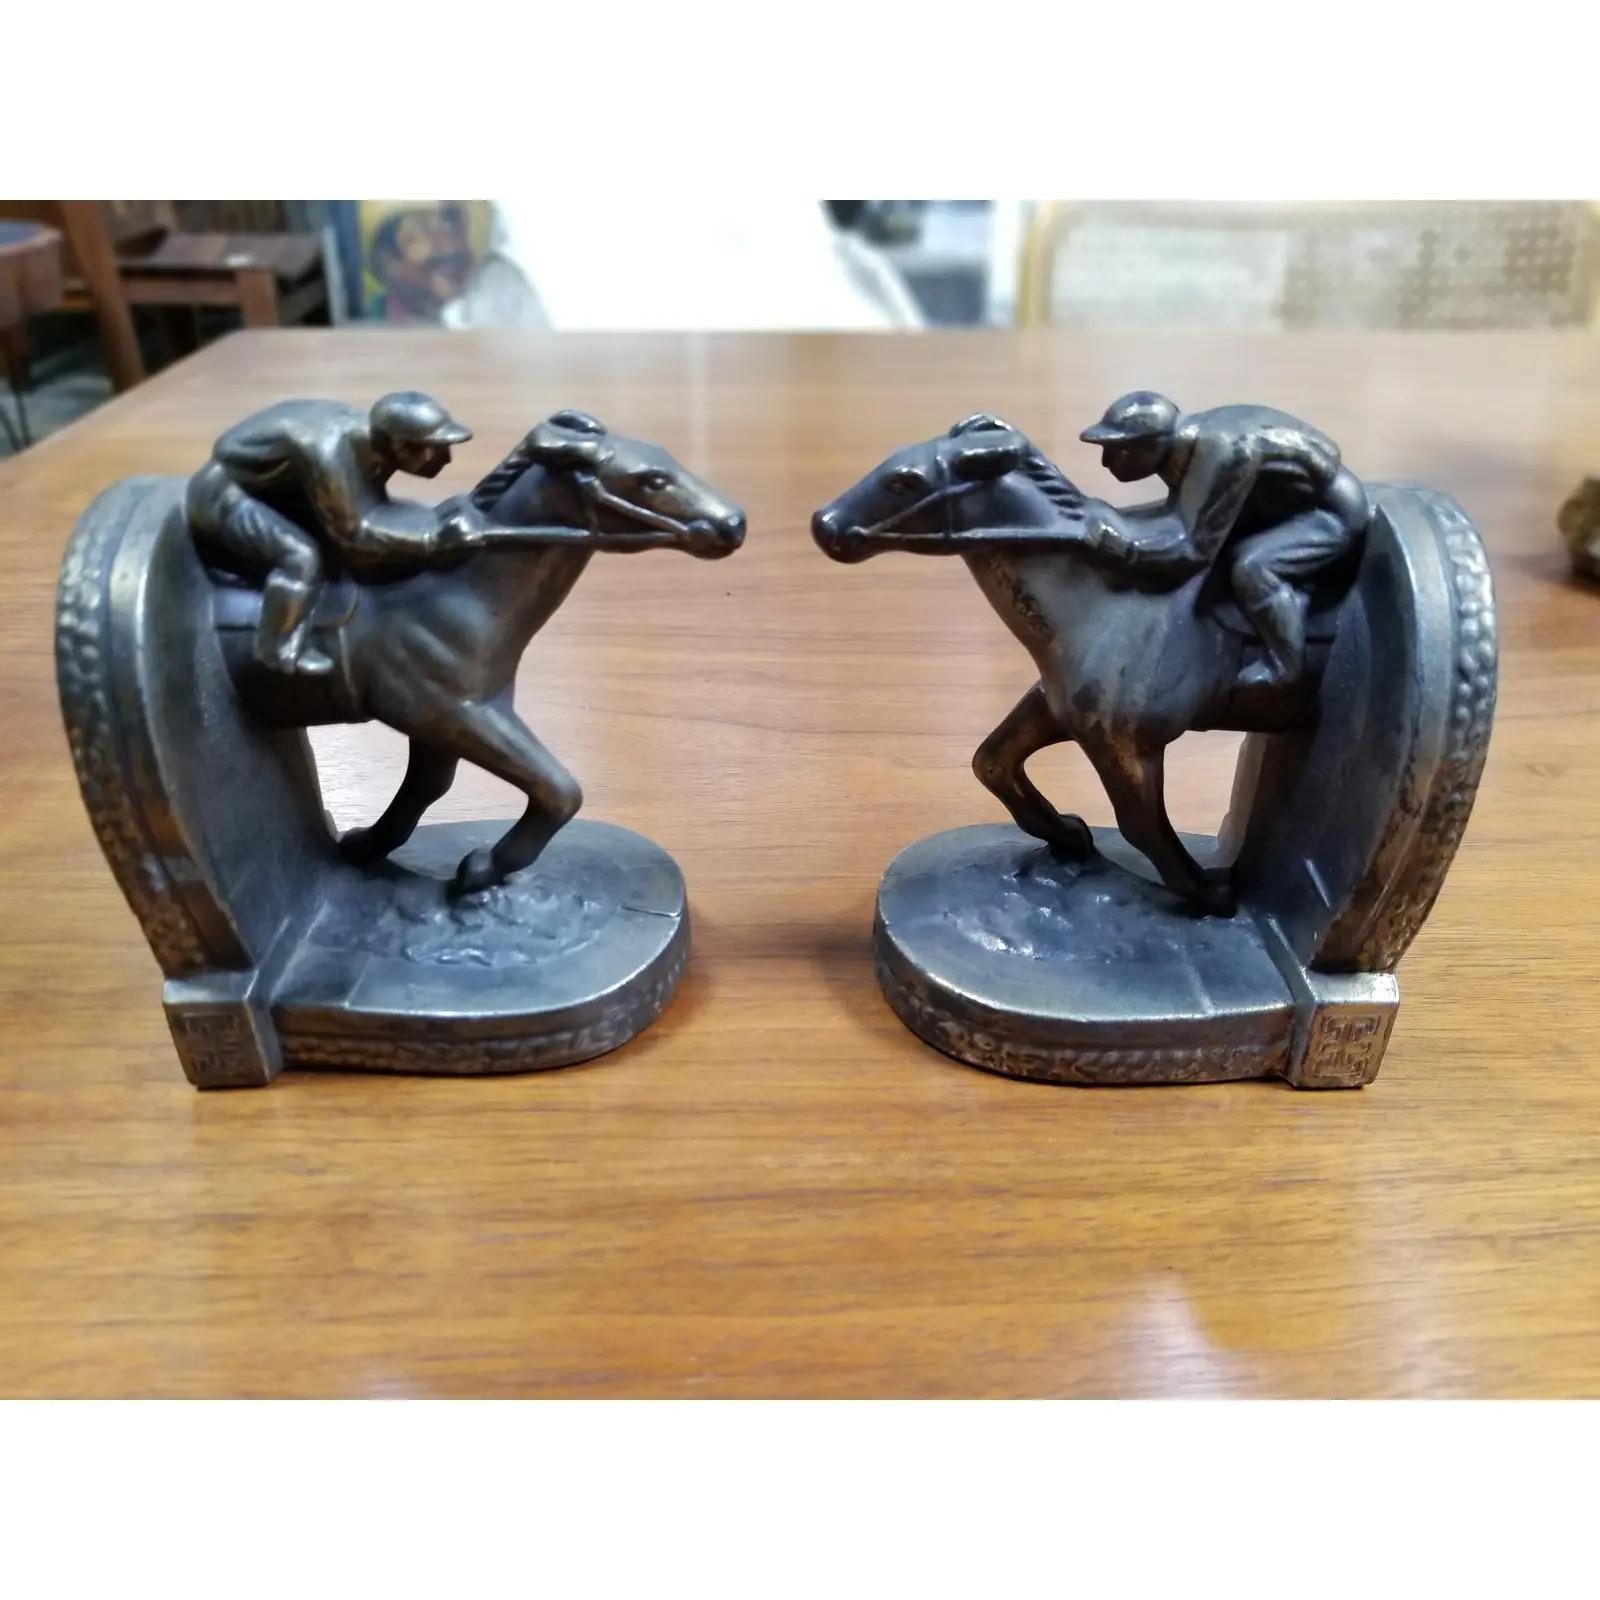 A pair of figurative horse jockey race, track metal bookends by BPM, dated 1950. Jockey riding in horse race. Original condition with original finish. Measurements are for each bookend.